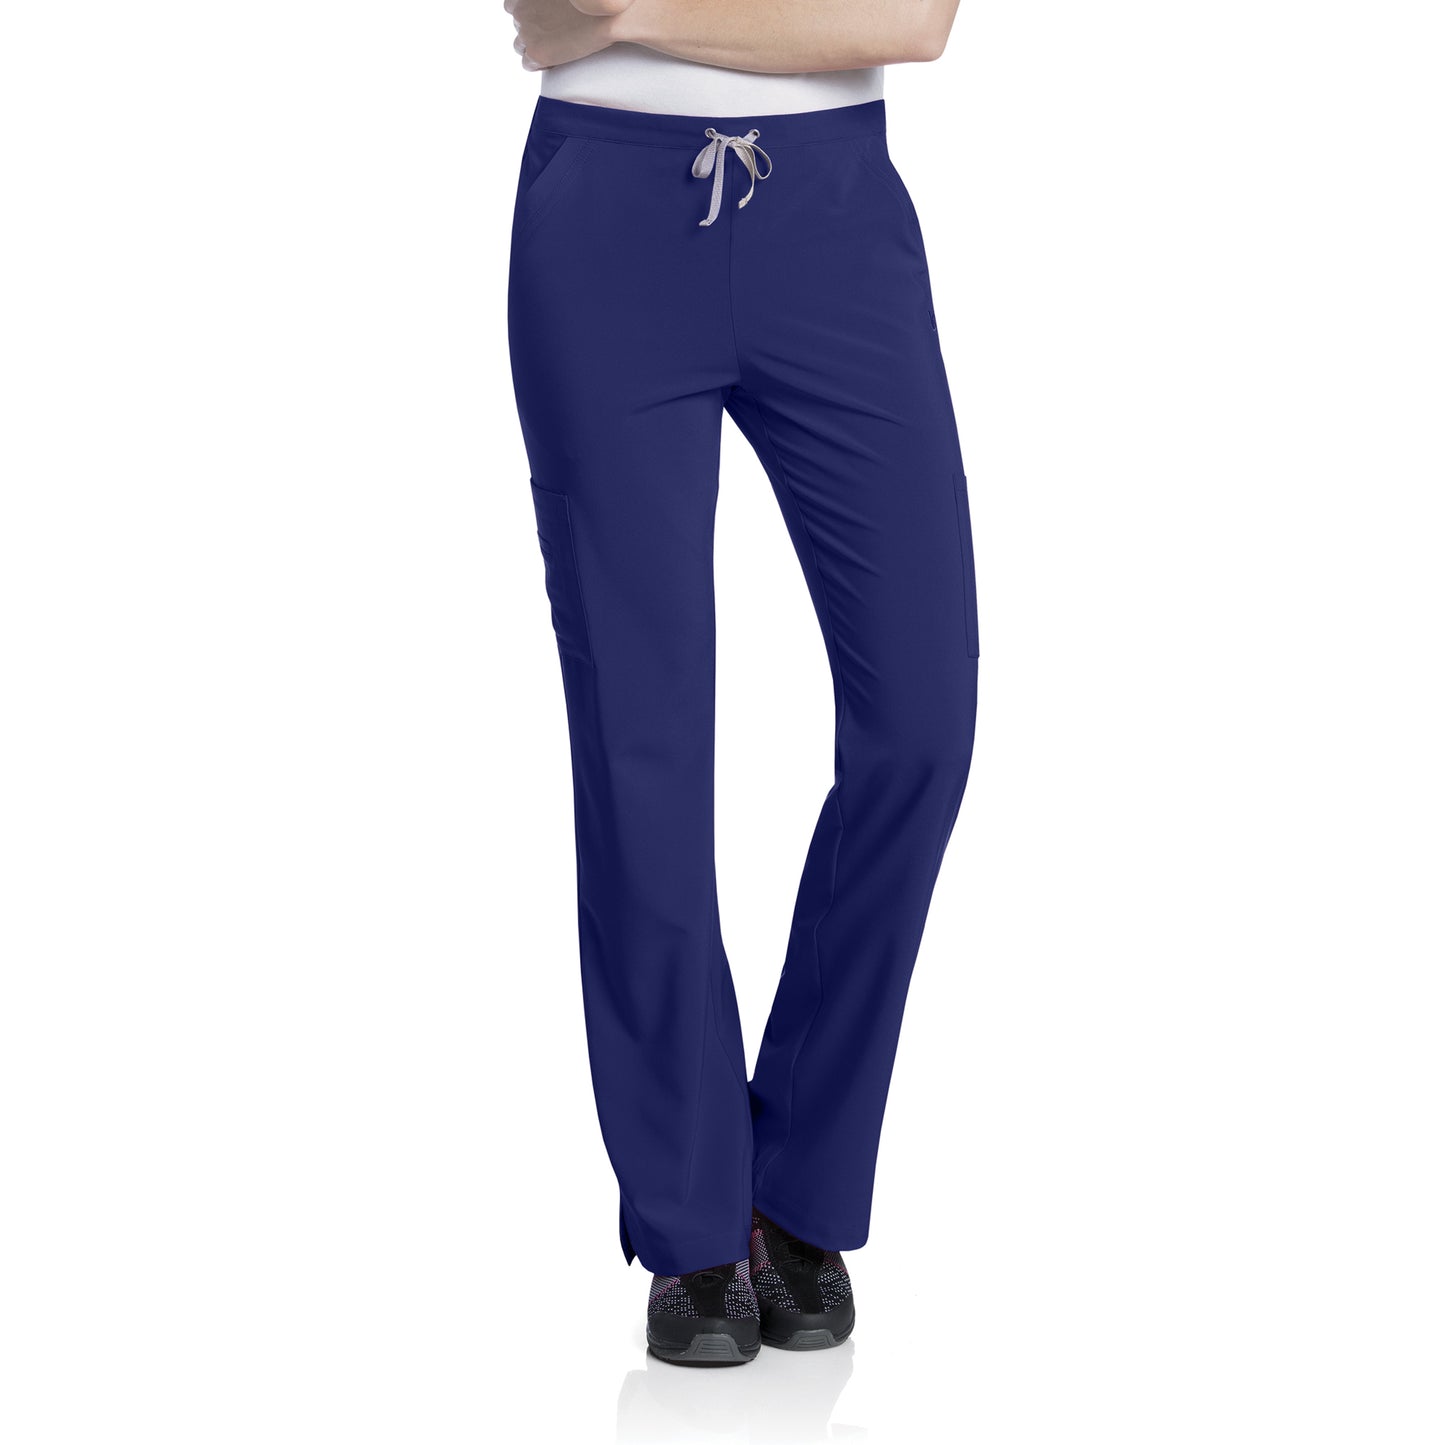 Women's Breathable Fabric Pant - 9312 - True Navy